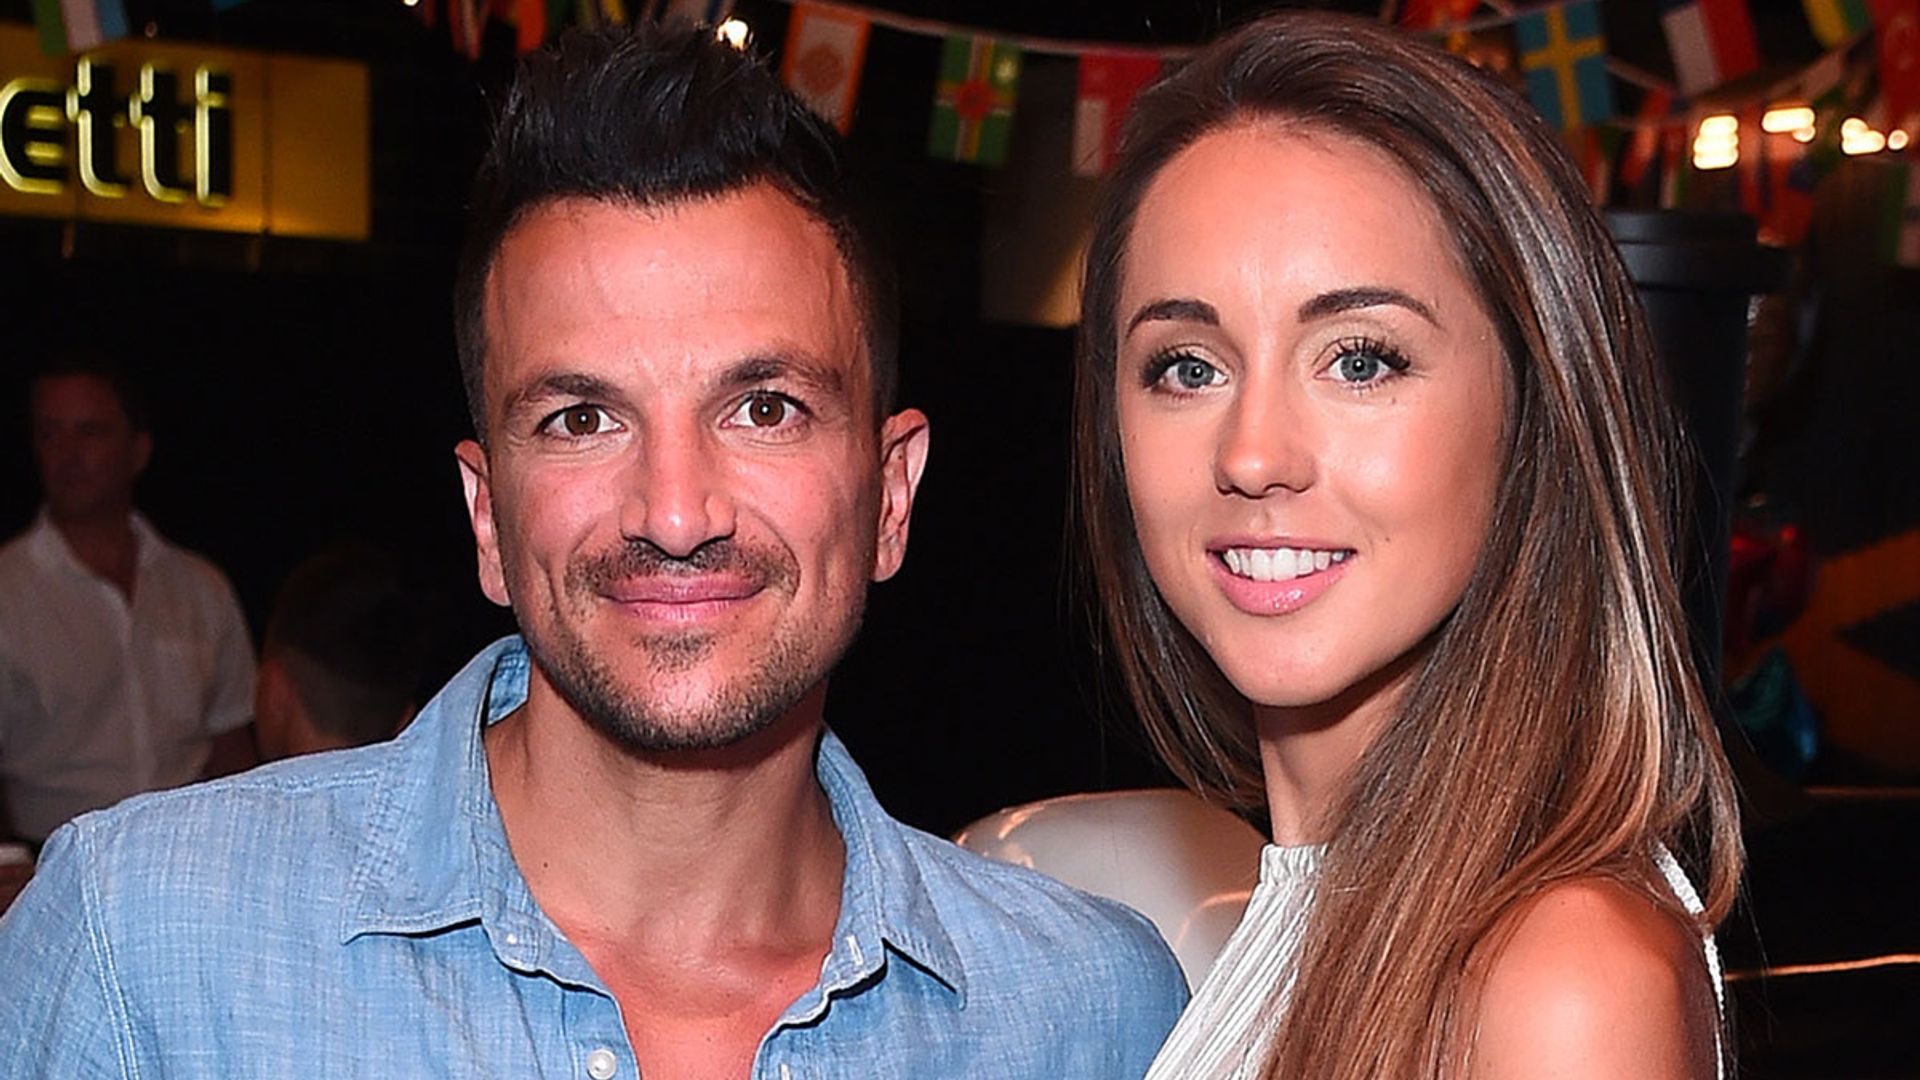 Peter Andre makes sweet revelation about lockdown romance with wife Emily